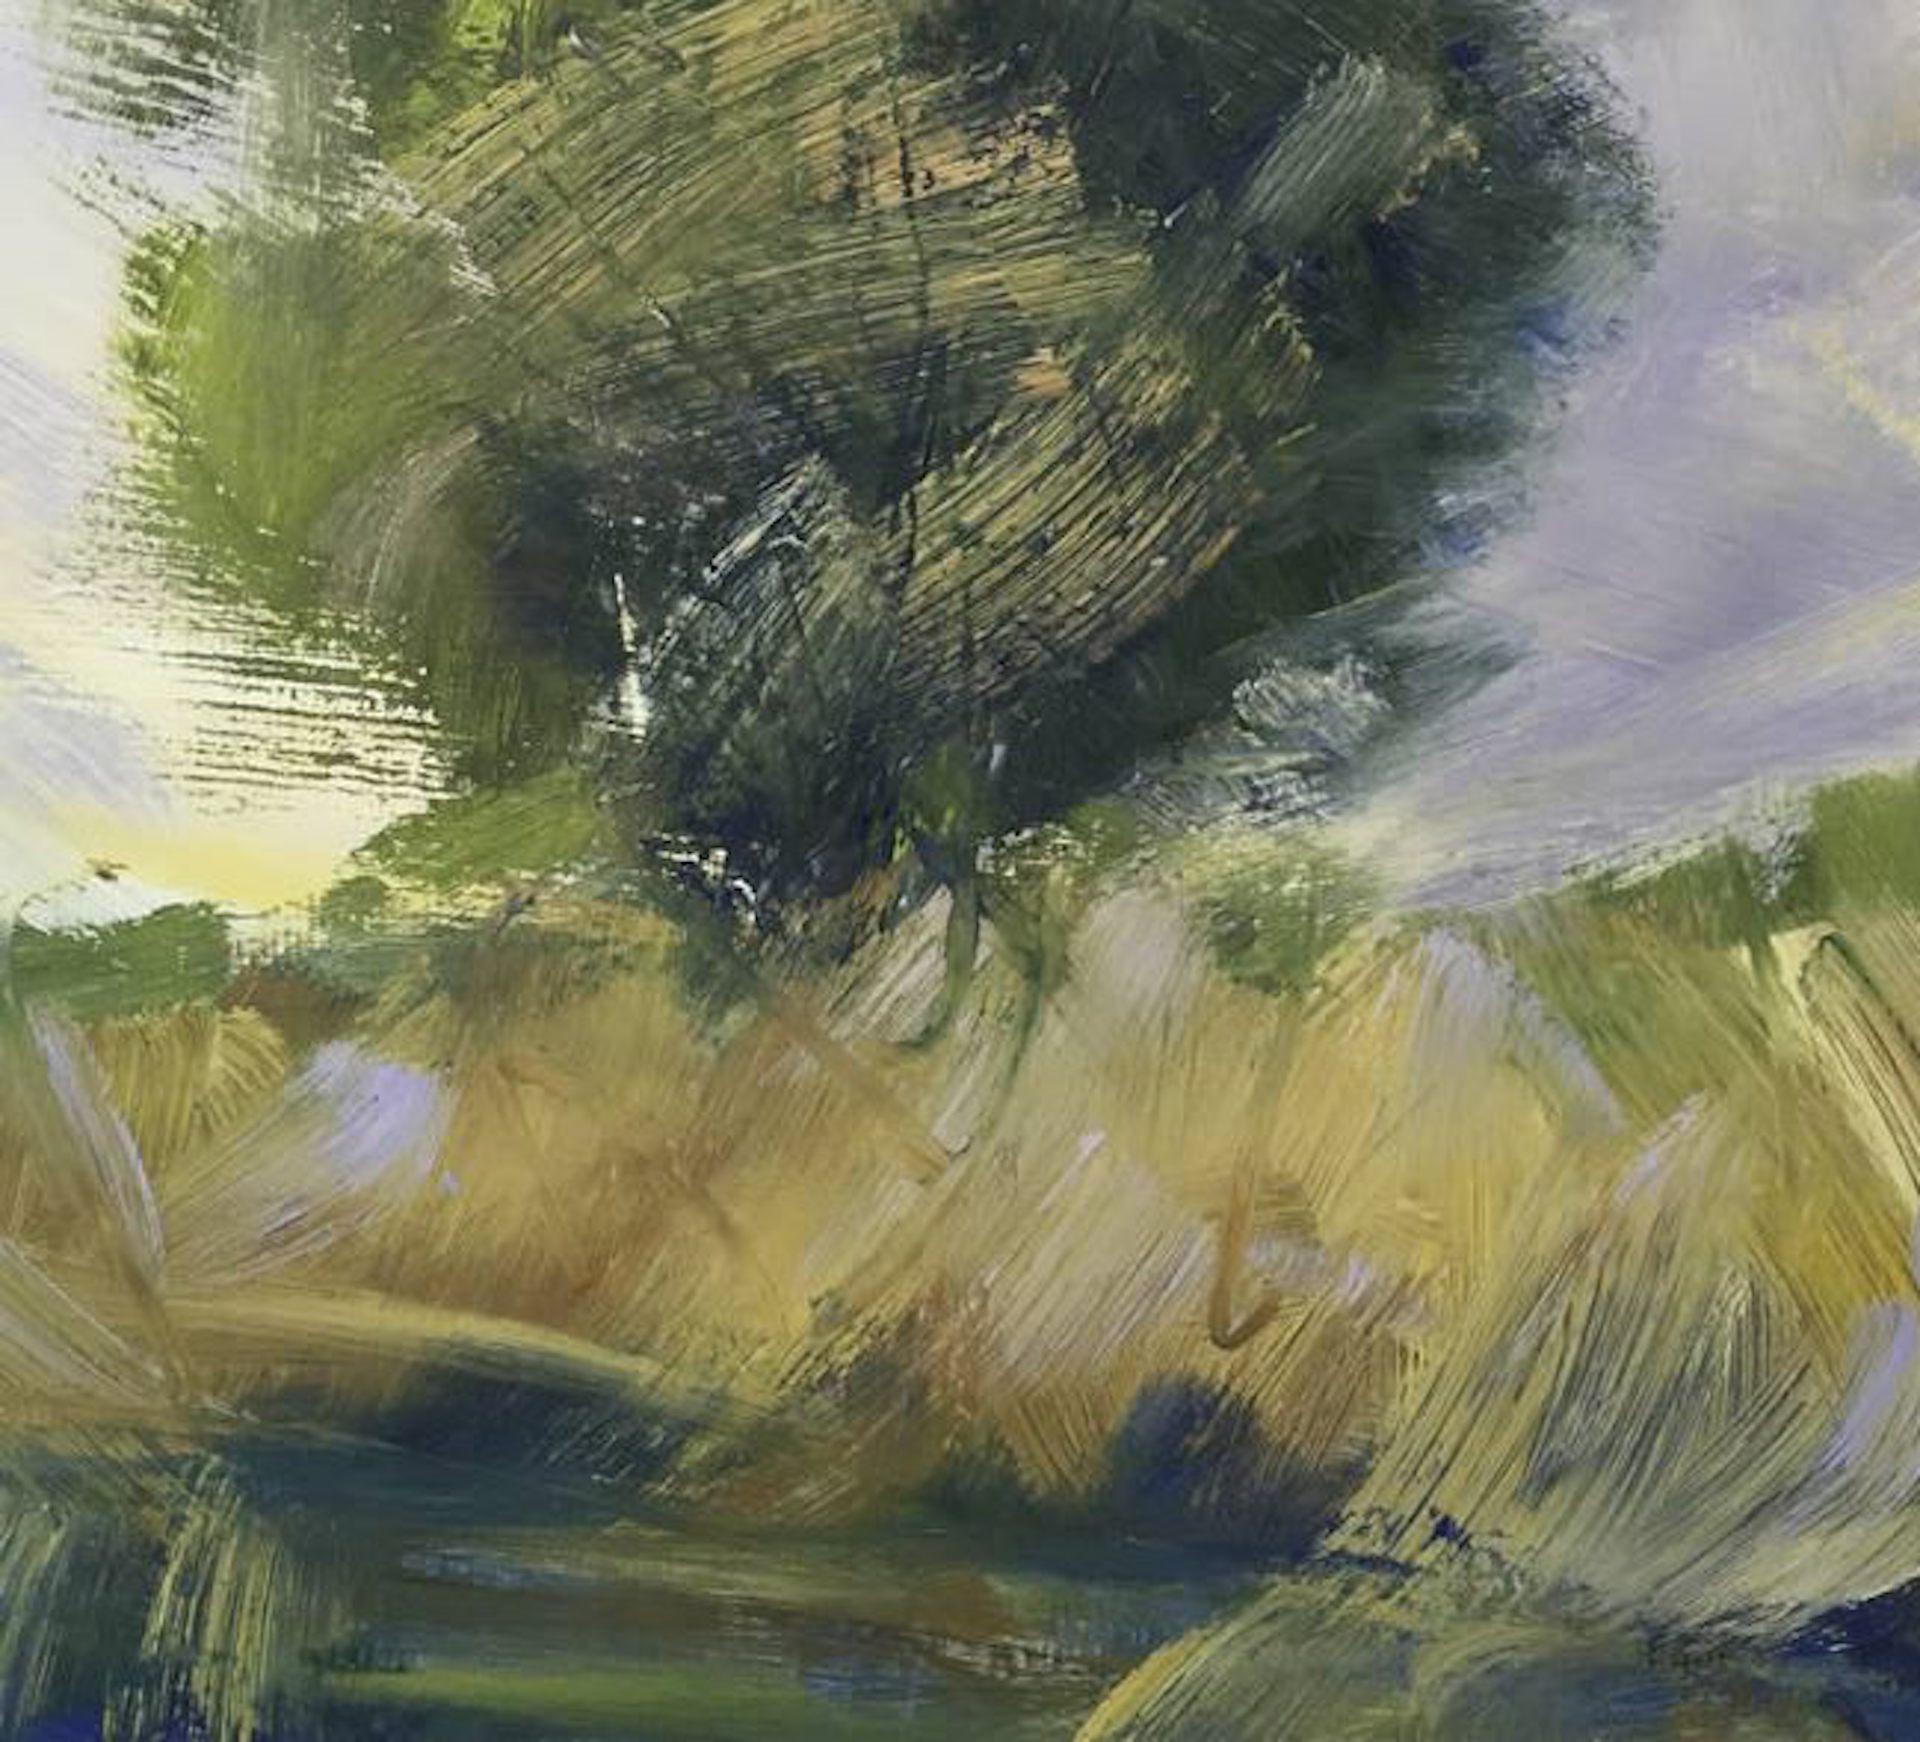 Early Autumn Study I by Suzanne Winn
Original landscape painting
Oil on Fabriano Pittura paper
Image size: H 22cm x W22cm
Framed size: H 29cm x W 29cm x D 3cm
Framed in a bespoke, hand-painted wooden frame
Please note that in situ images are purely